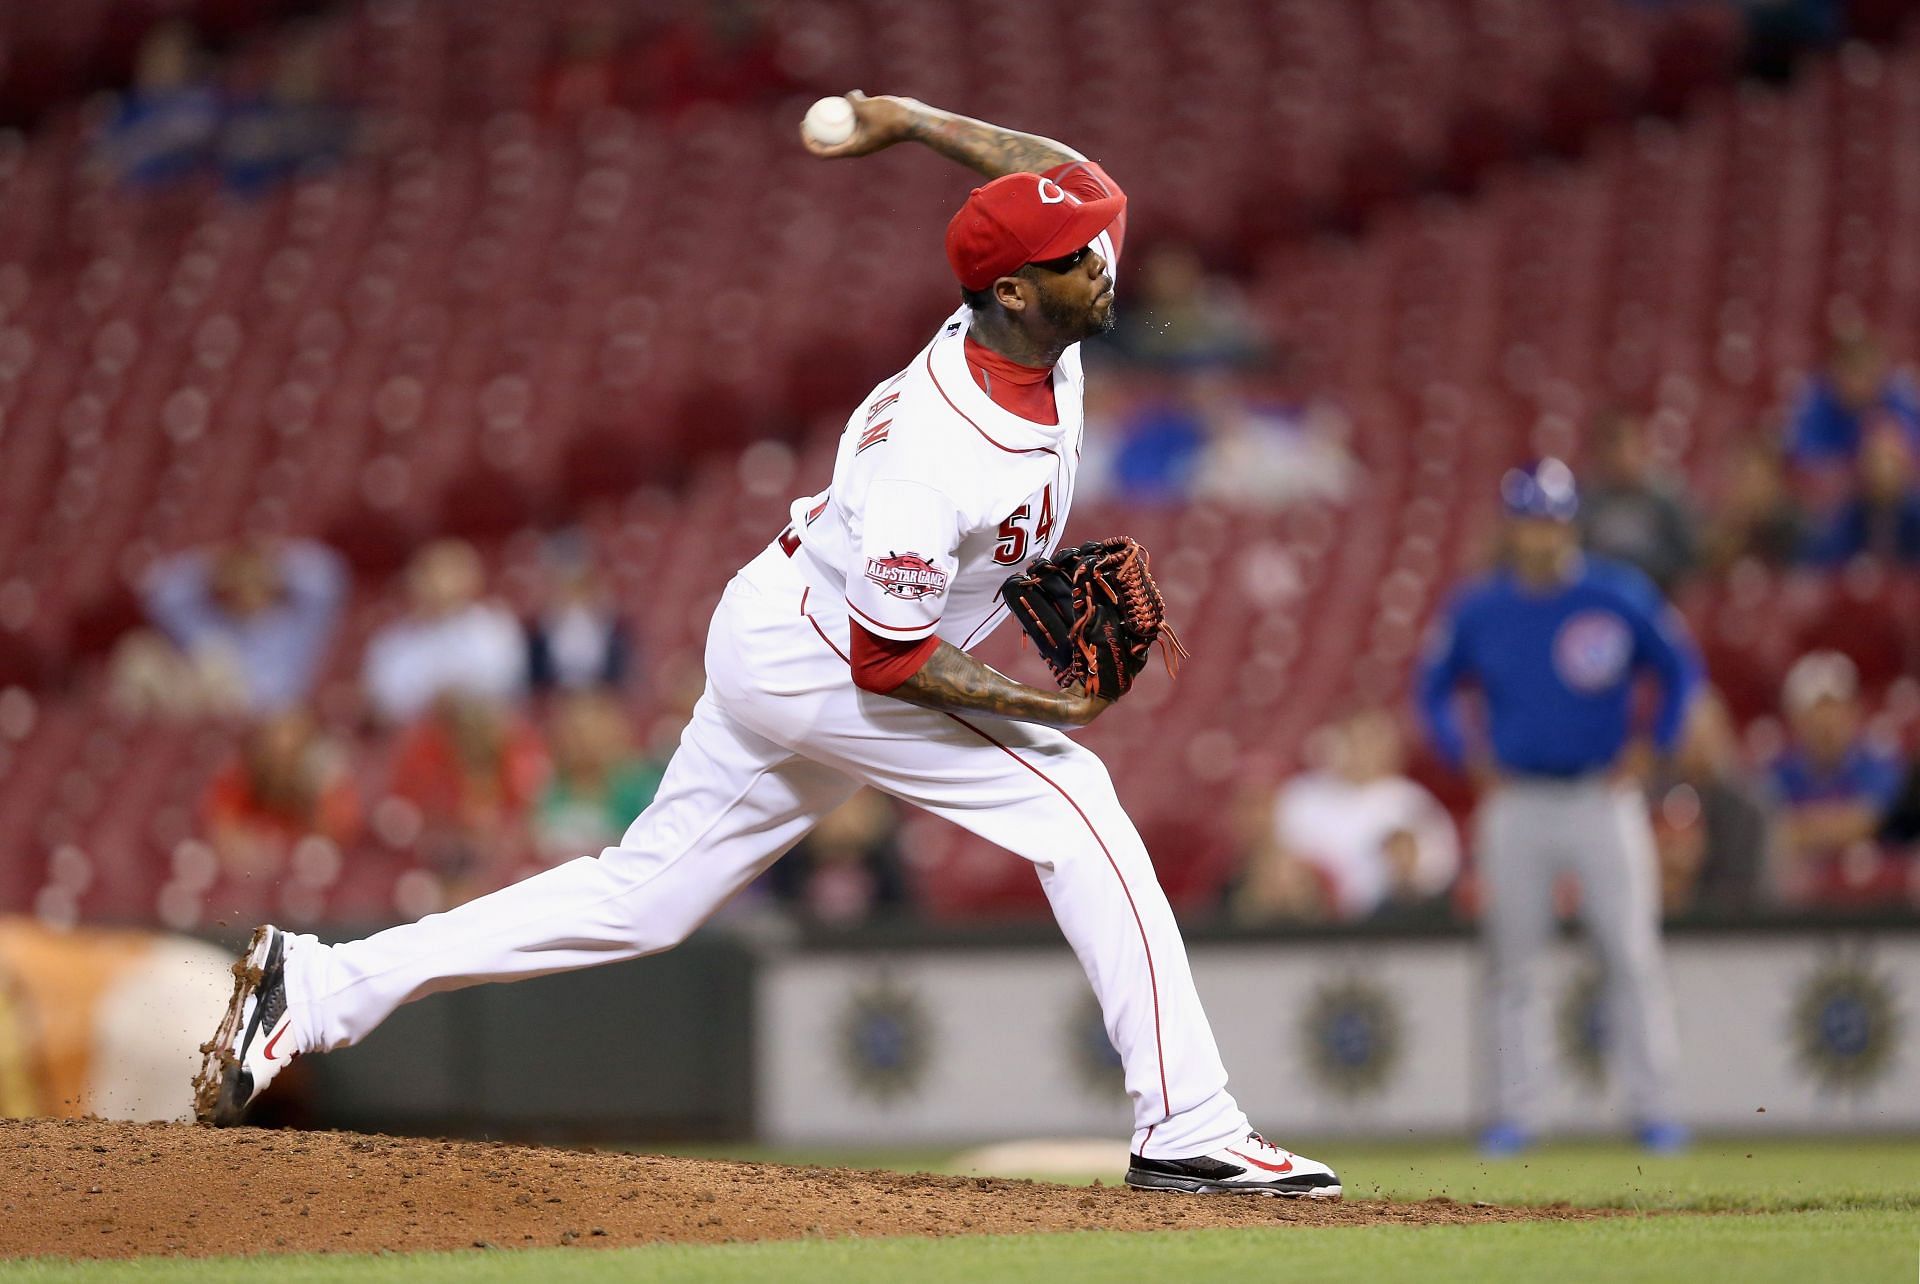 Aroldis Chapman #54 of the Cincinnati Reds throws a pitch during the game against the Chicago Cubs